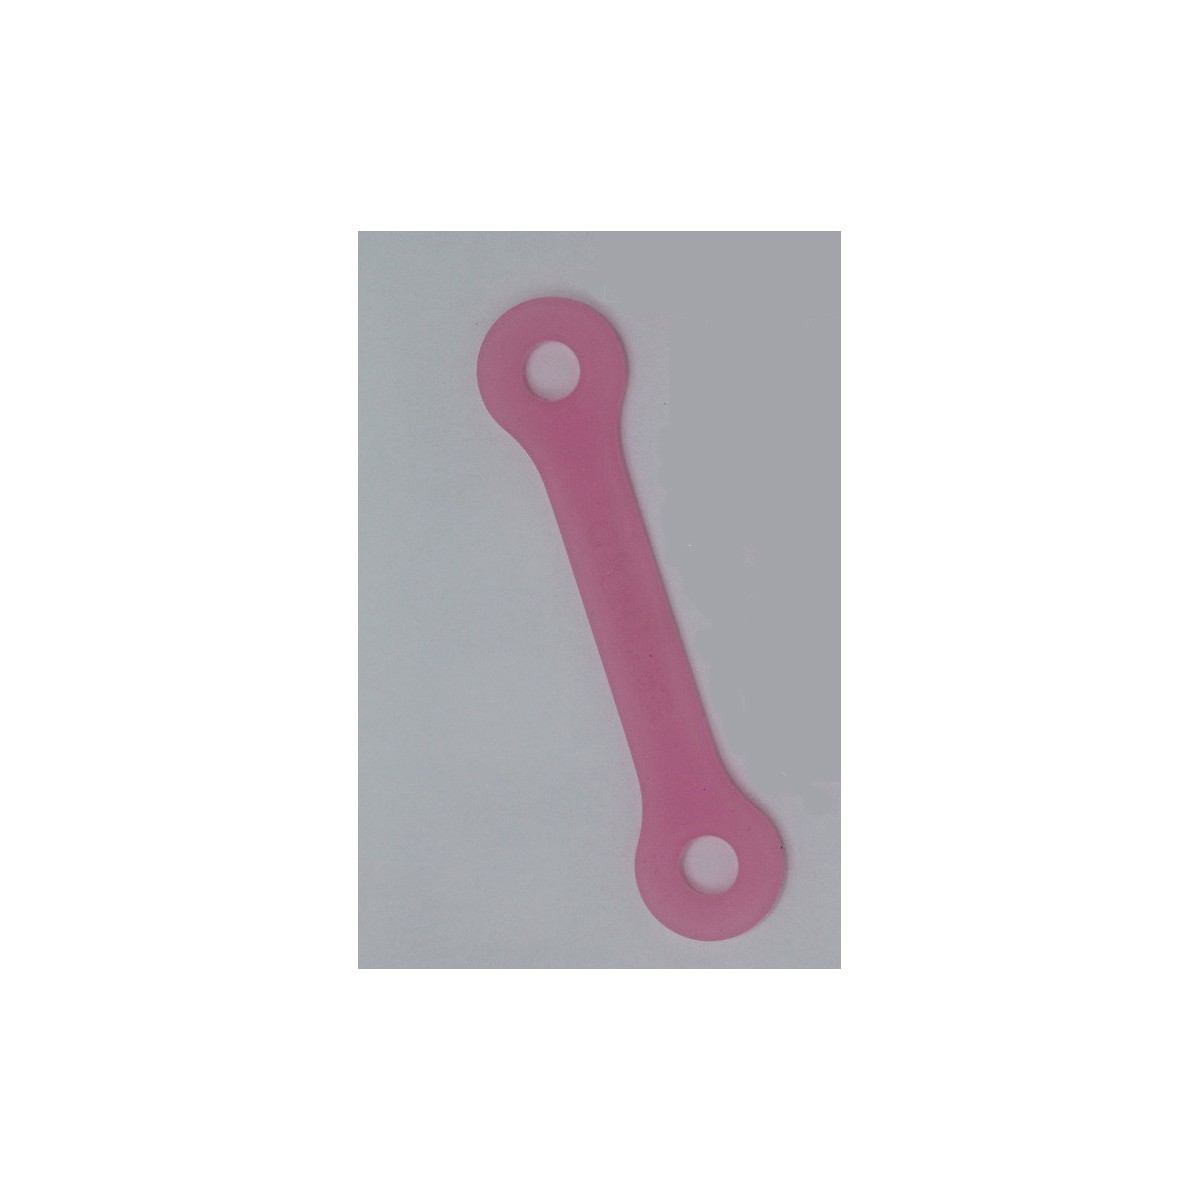 "EazyHold" Grip and support! - Pink ( 10.16 cm )